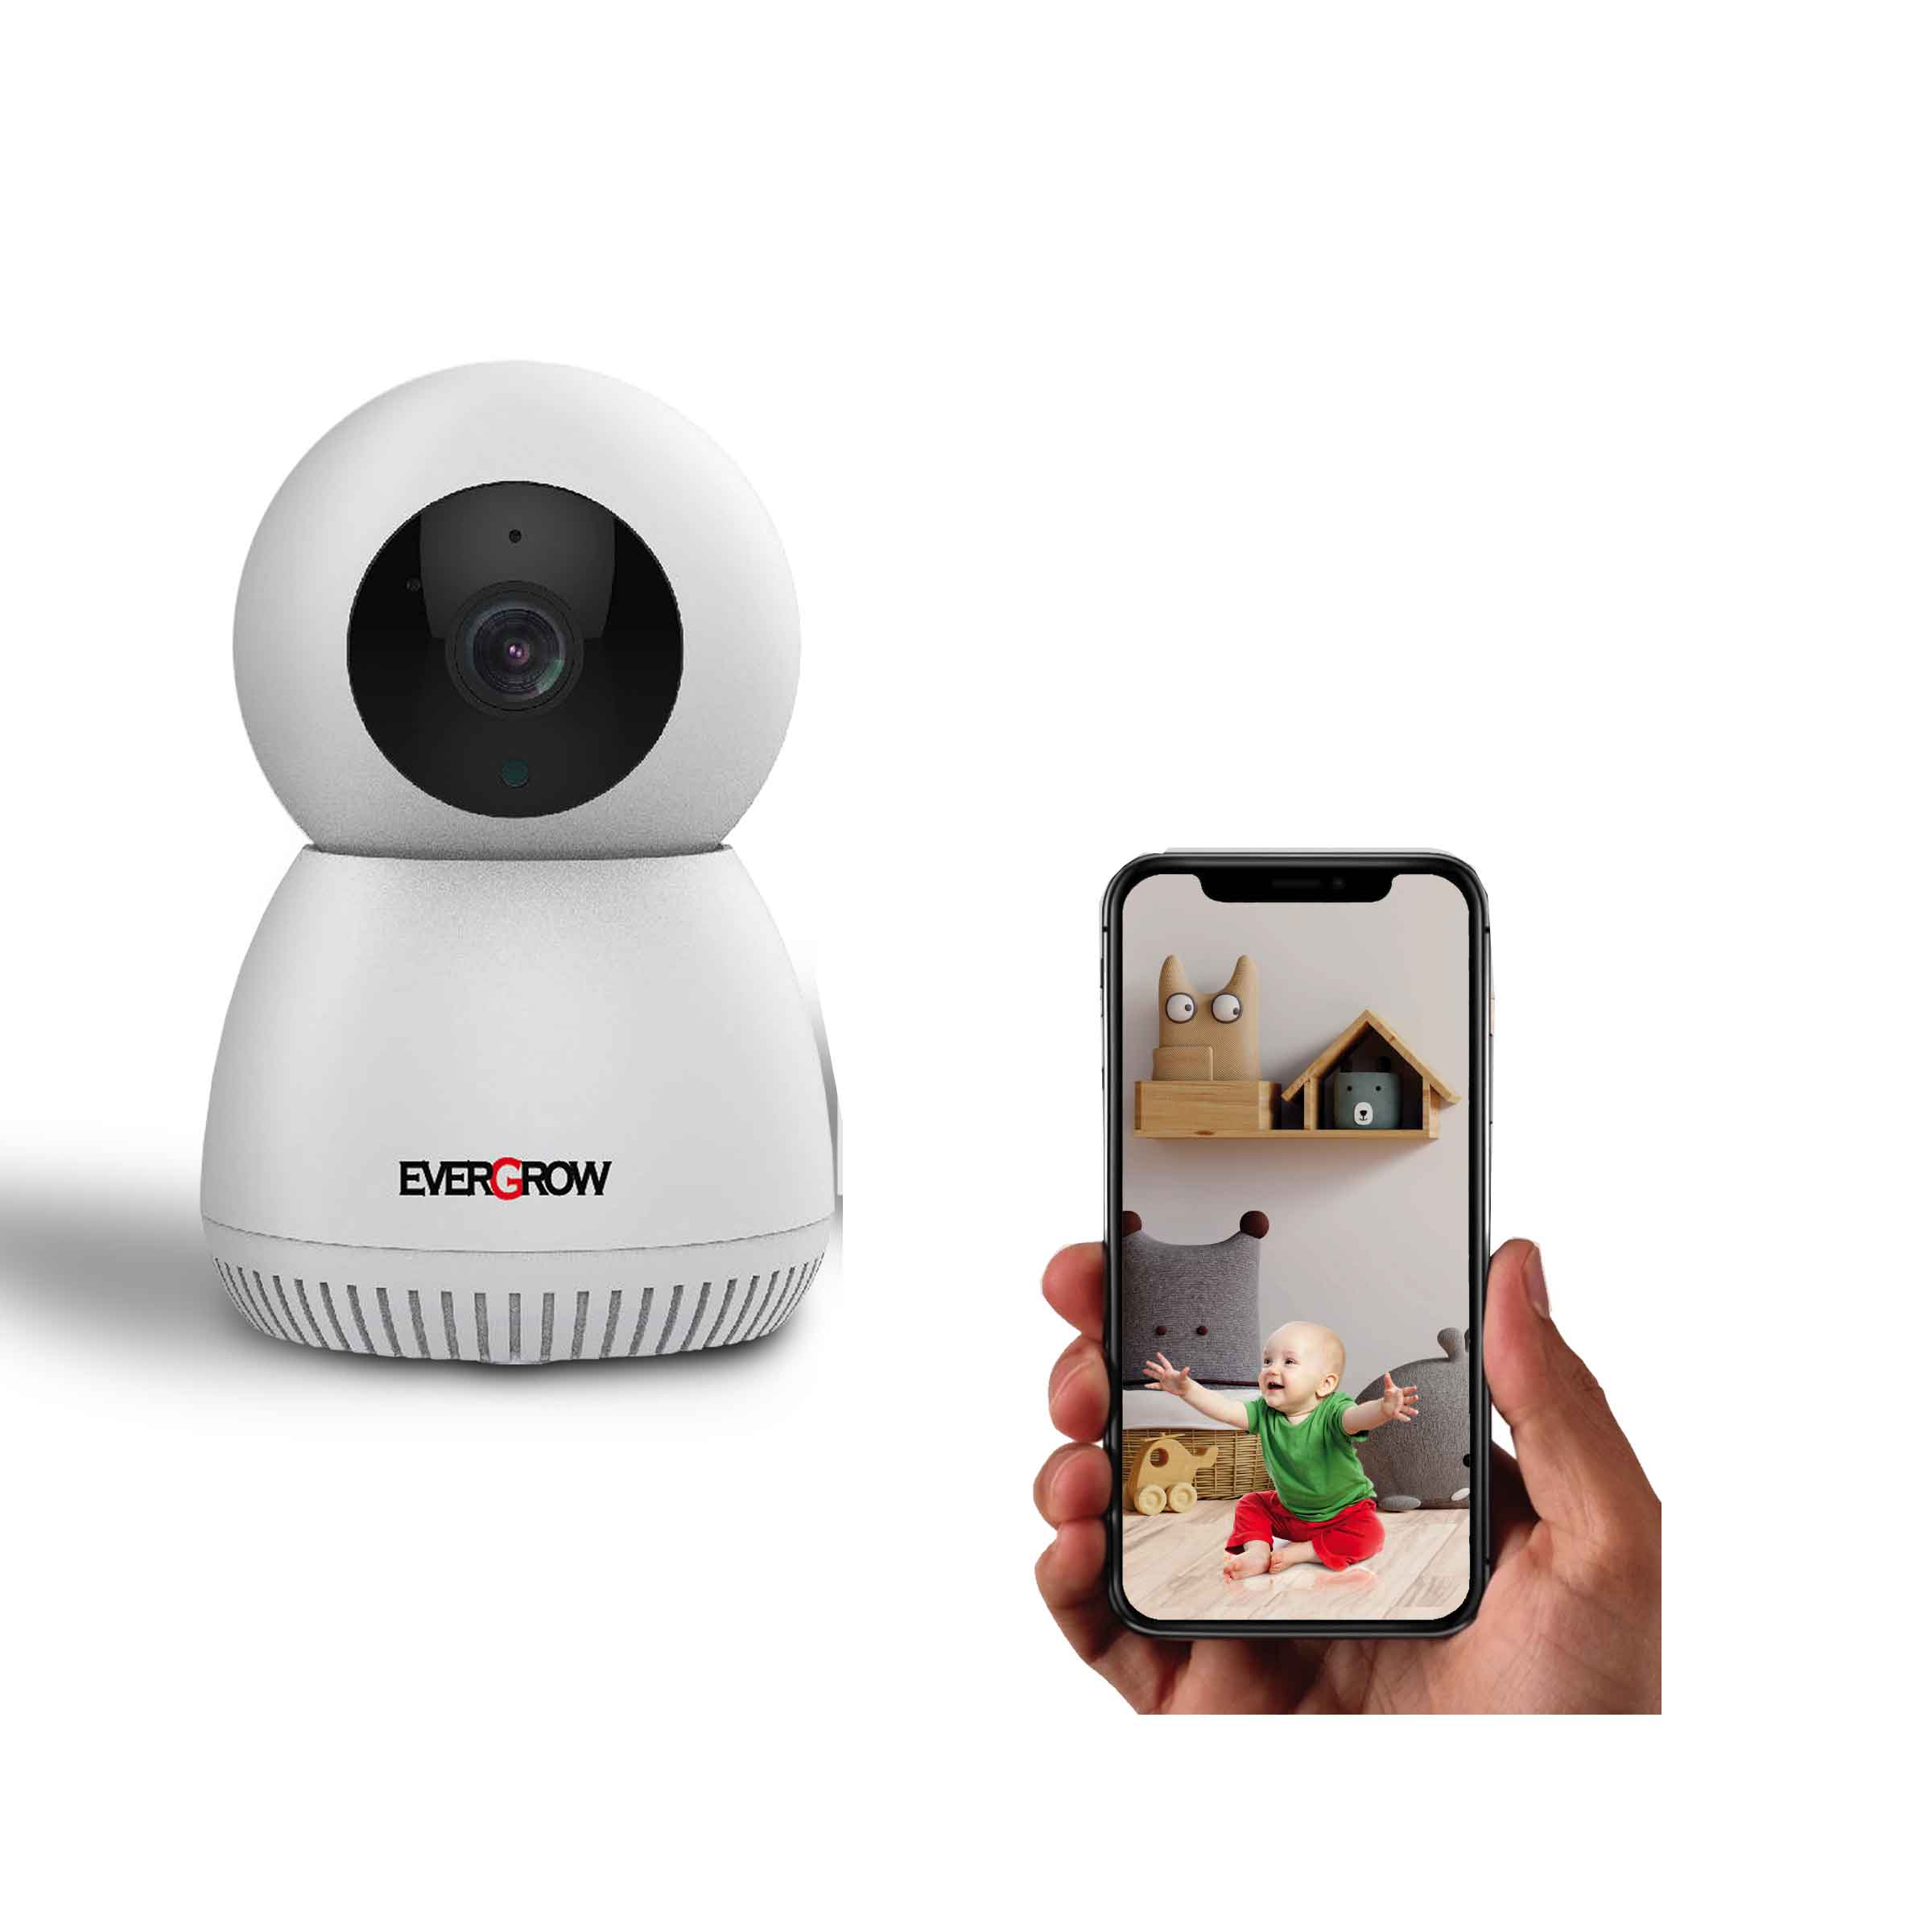 EverGrow Baby Monitor, WiFi Pet Camera Indoor, 360-degree Wireless IP Nanny Camera, 1080P Home Security Camera, Motion Tracking, IR Night Vision, Two-Way Audio, Alexa and PTZ(CAM-CA43-168) - image 3 of 8